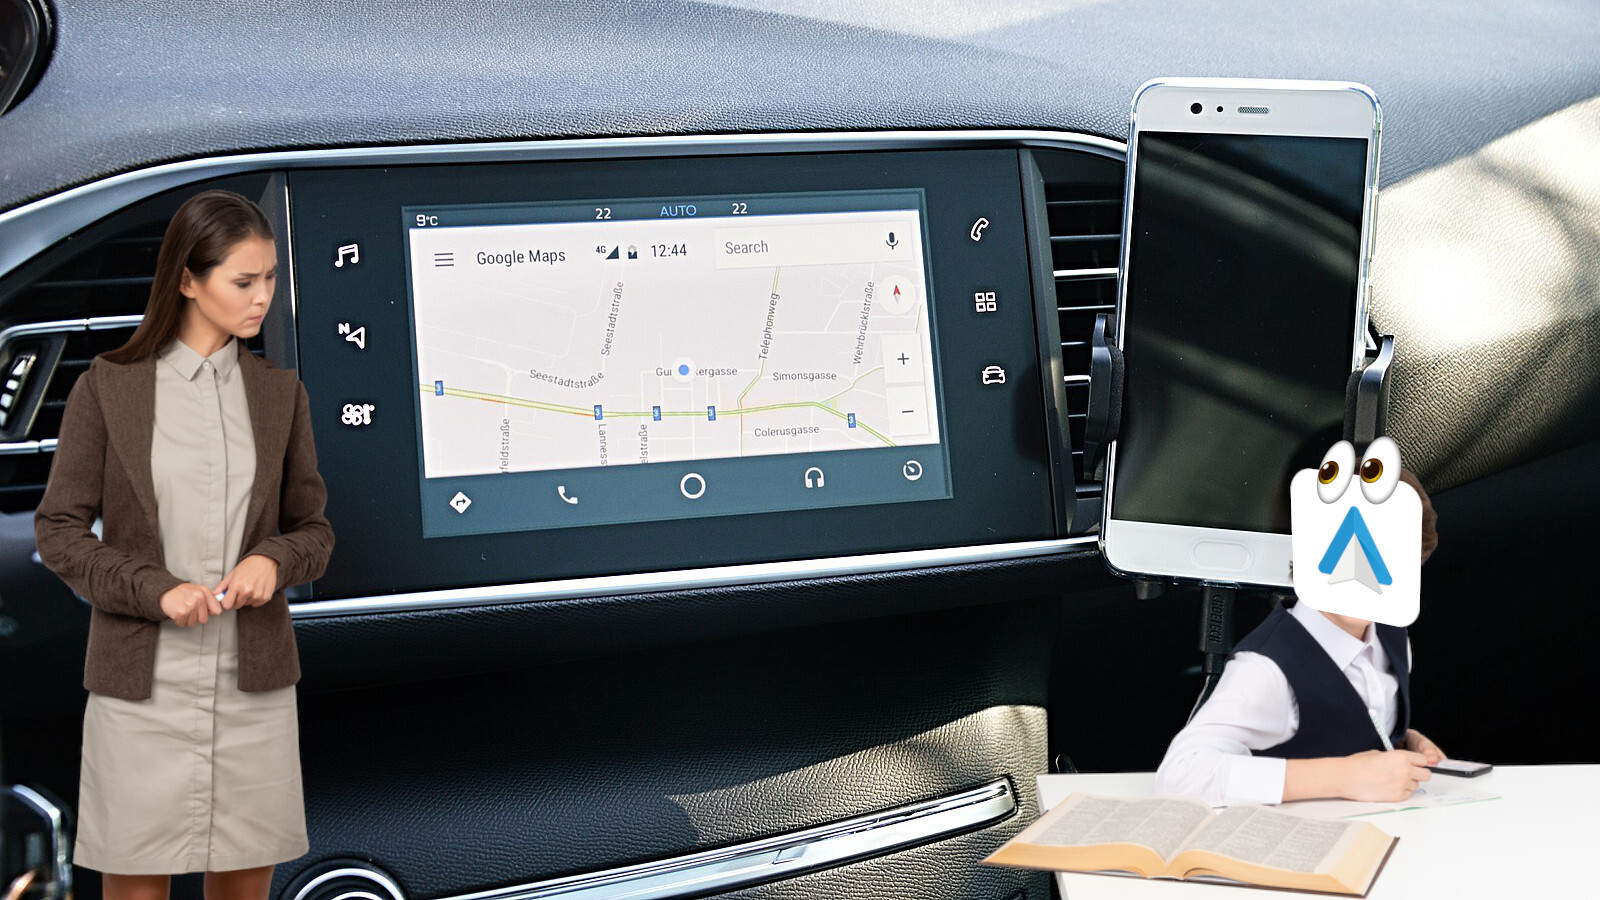 Android Auto vs Android Automotive: What’s the difference?